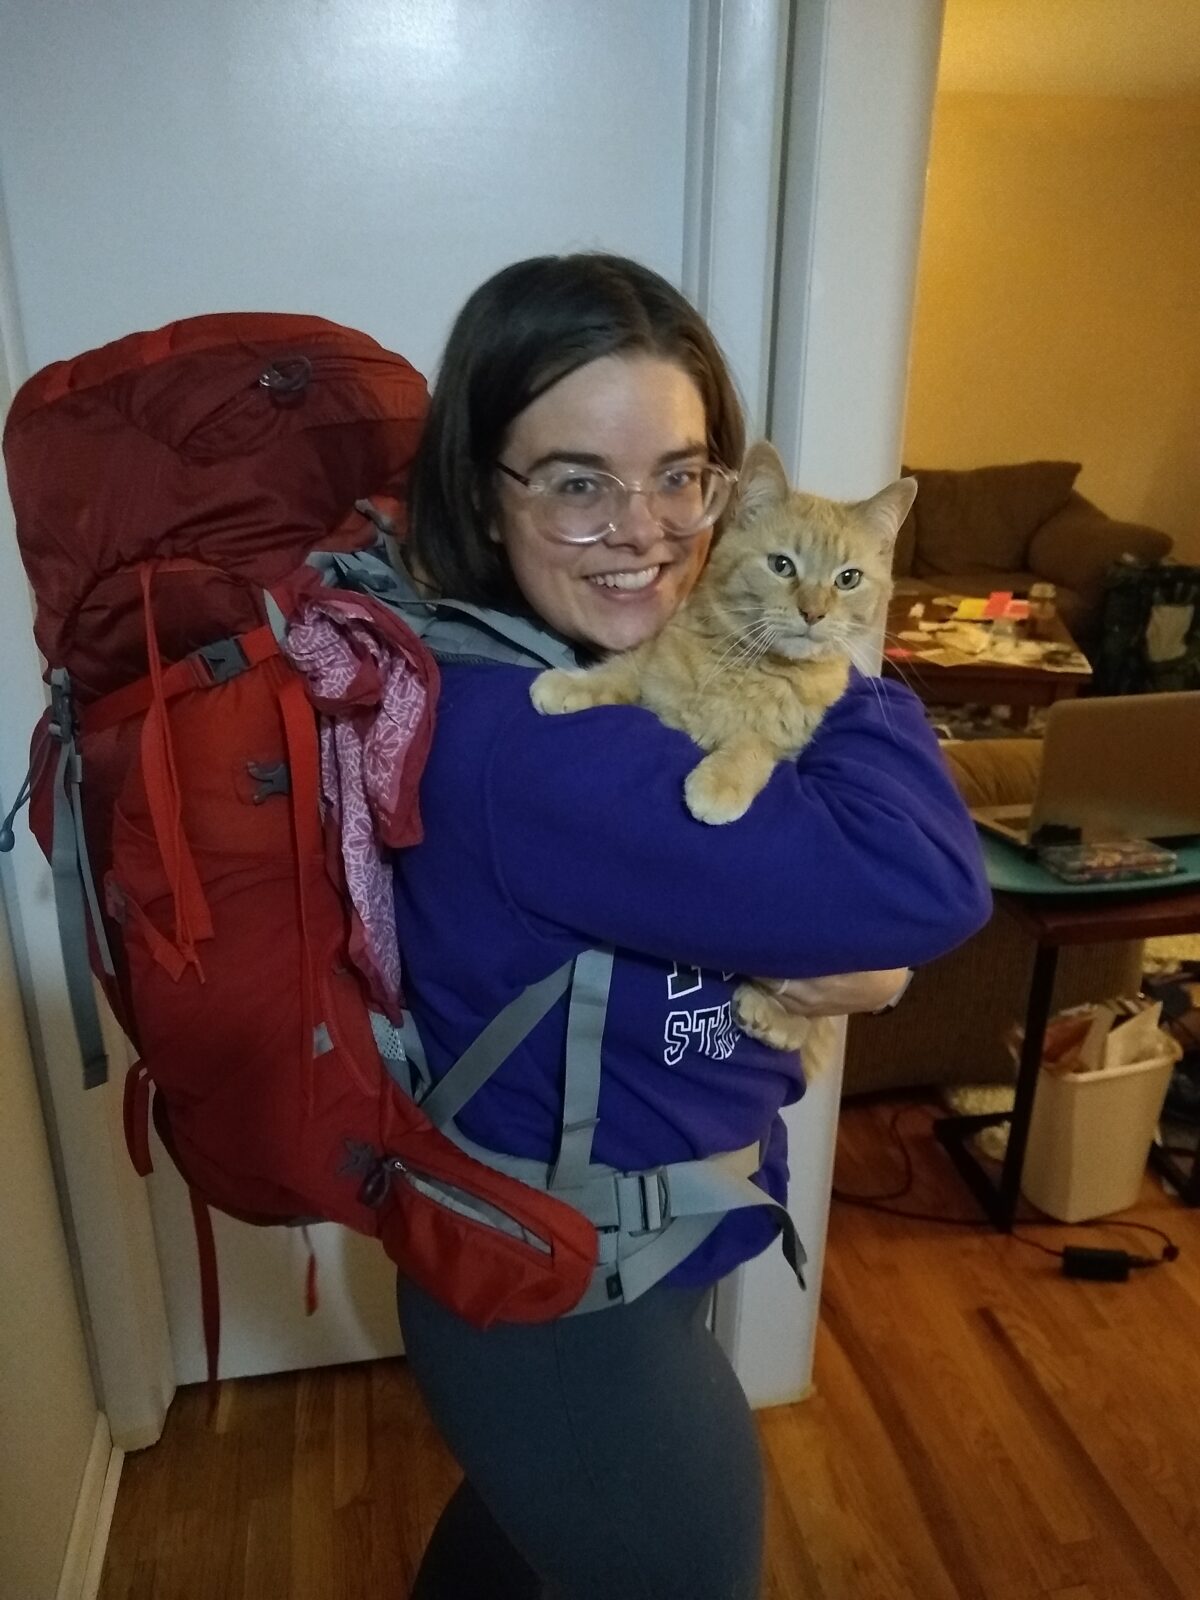 Rachel-with-pack-and-alice